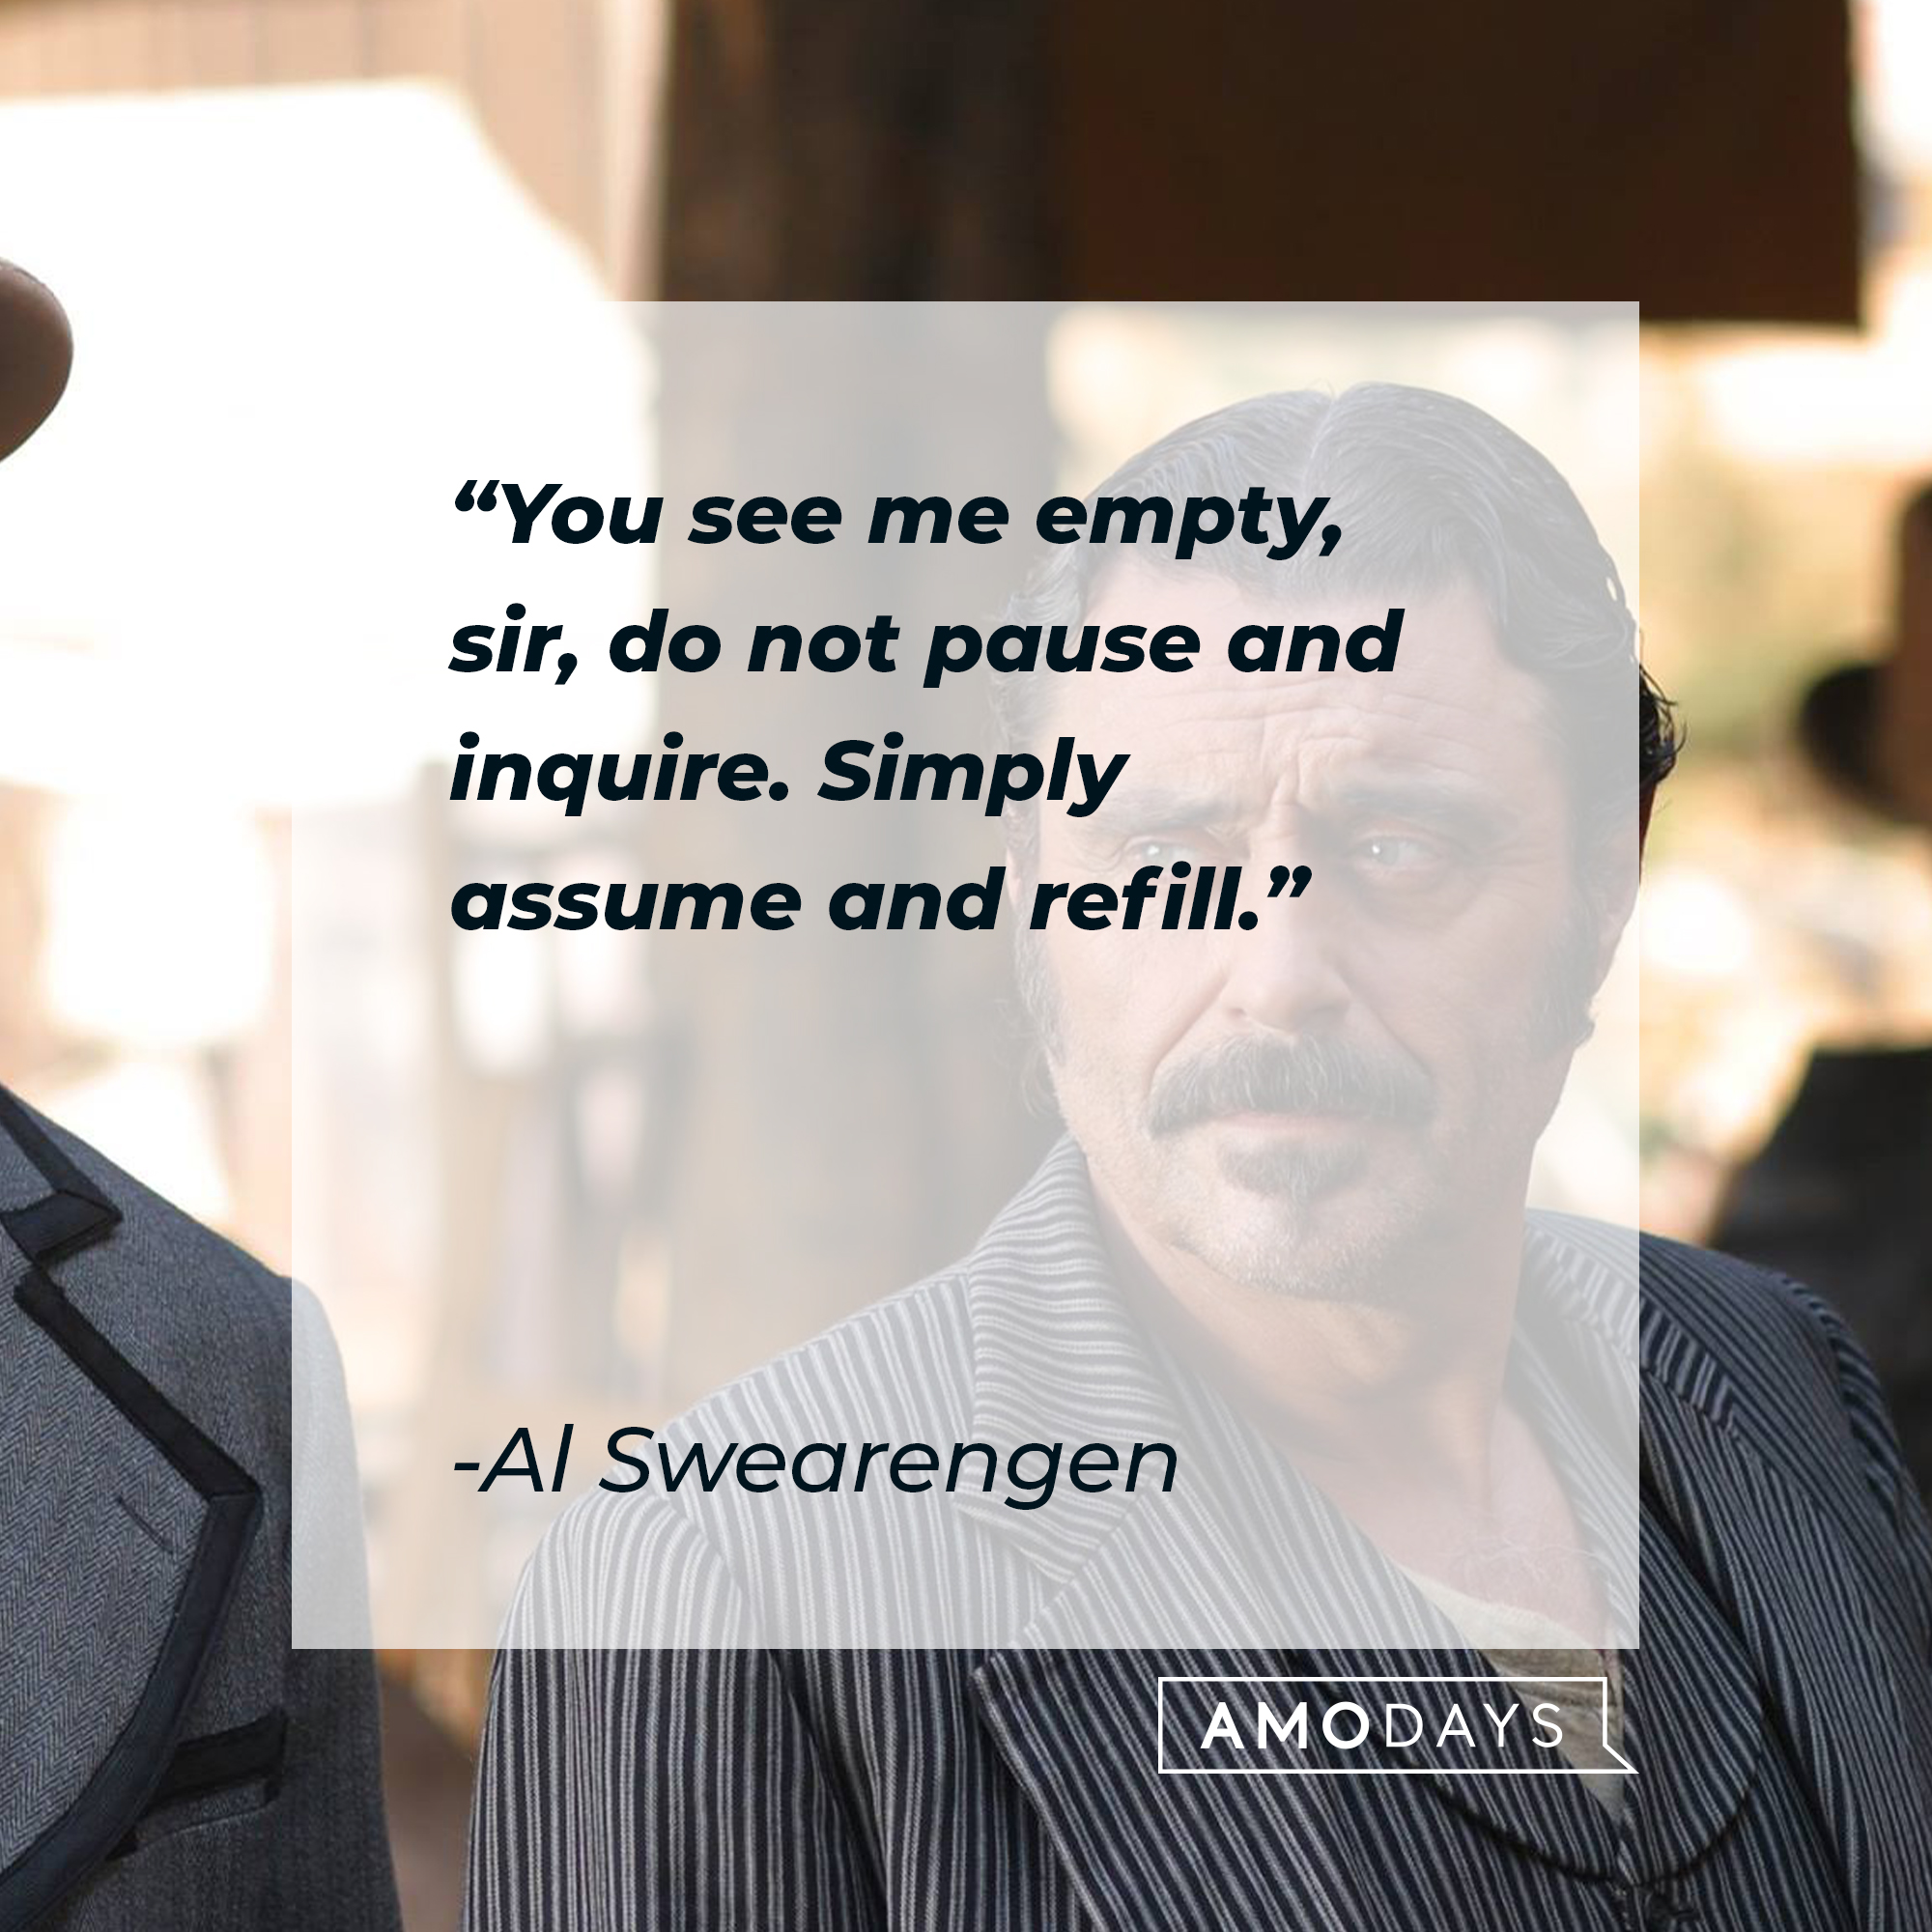 Al Swearengen with his quote, "You see me empty, sir, do not pause and inquire. Simply assume and refill." | Source: Facebook/Deadwood